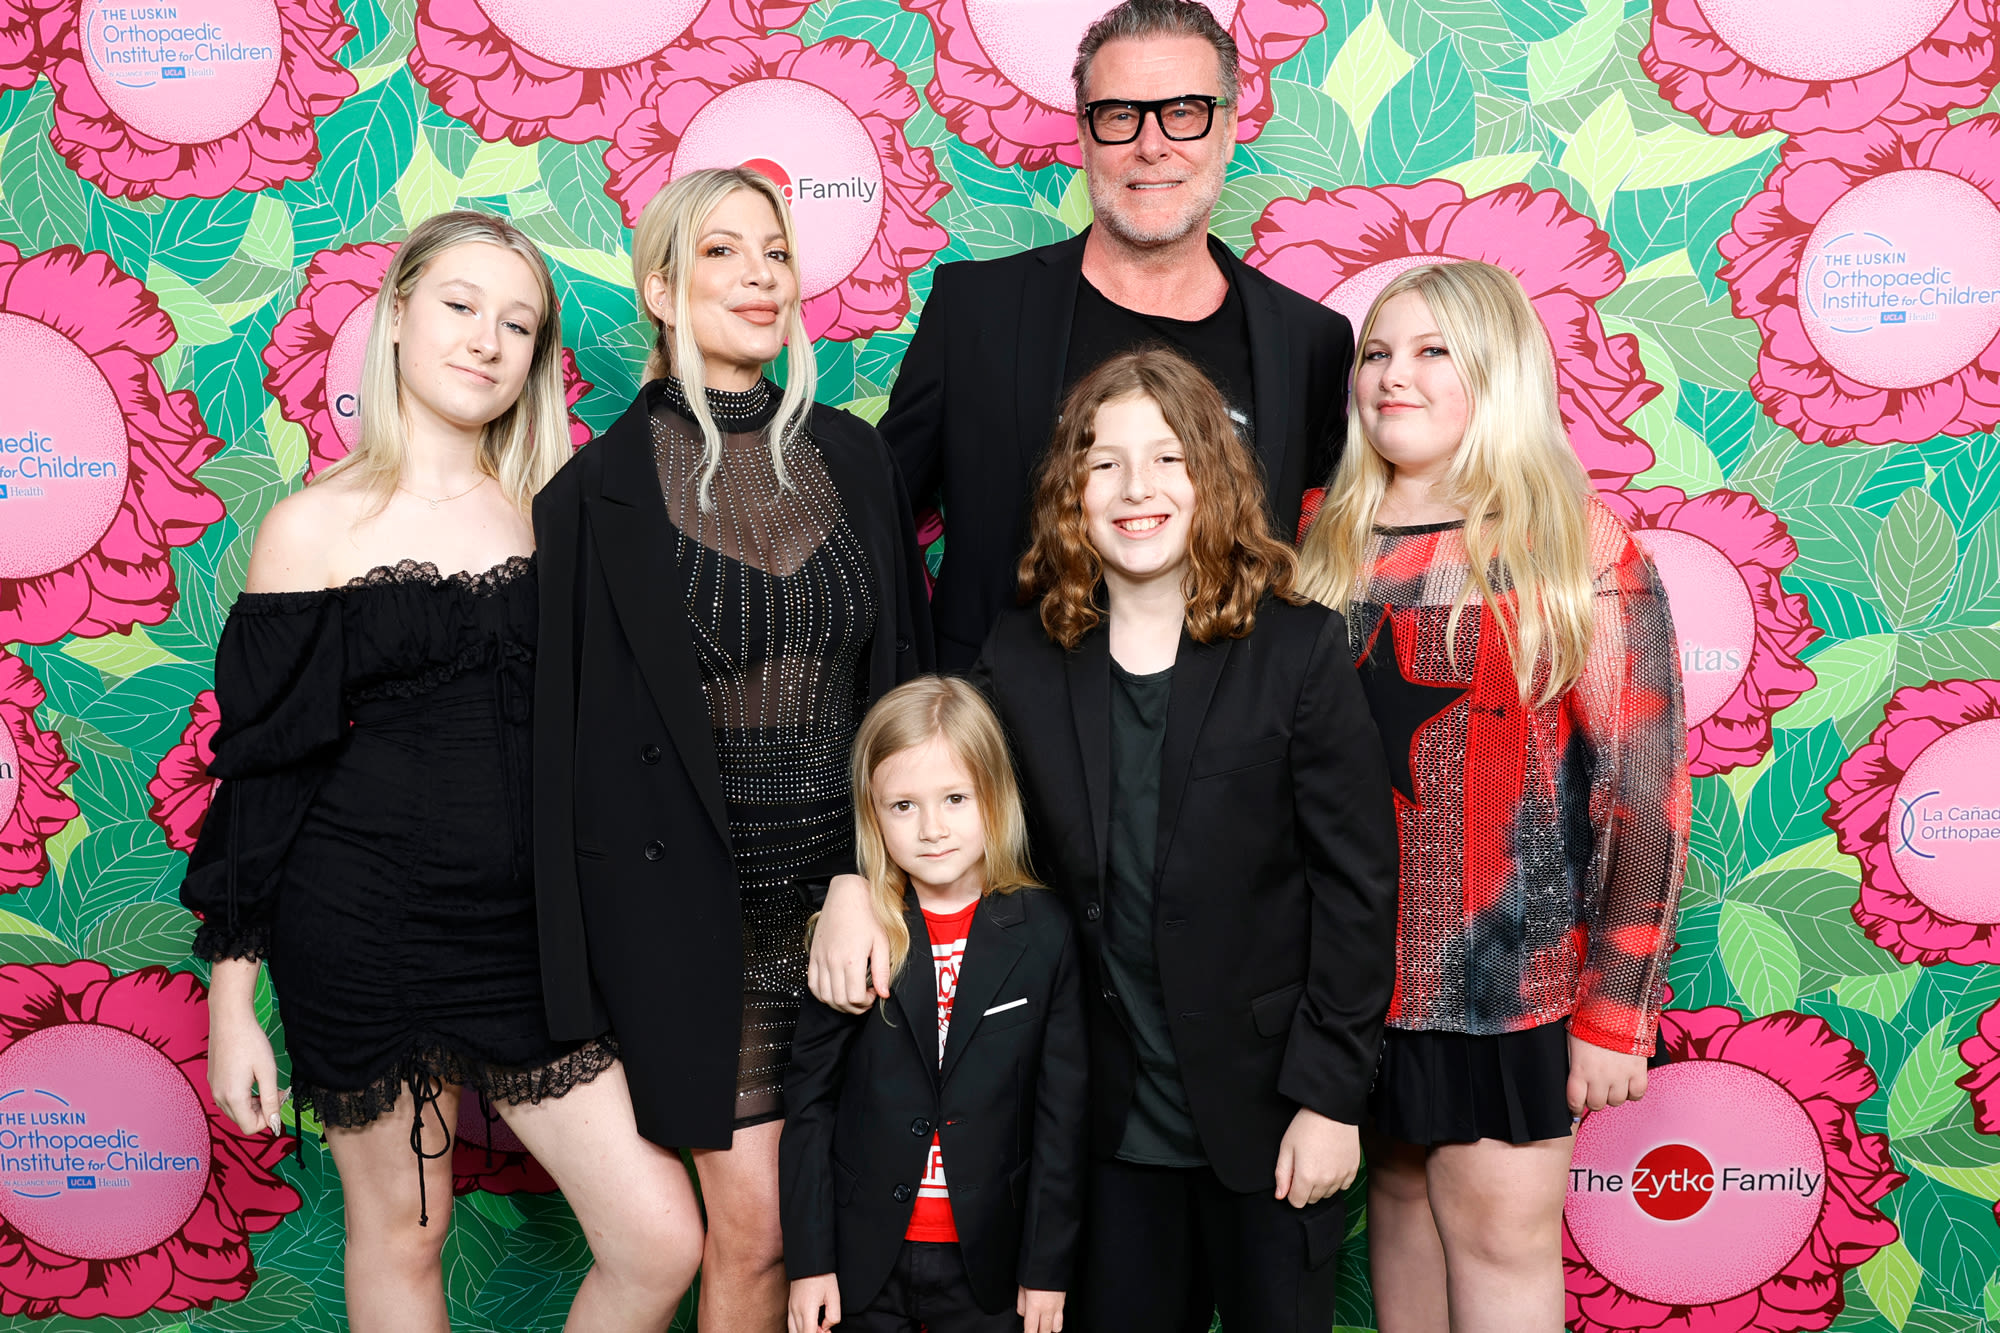 Tori Spelling Took All 5 Kids to Watch Her Get Piercings on Mother’s Day: ‘It Was a Major Thing’